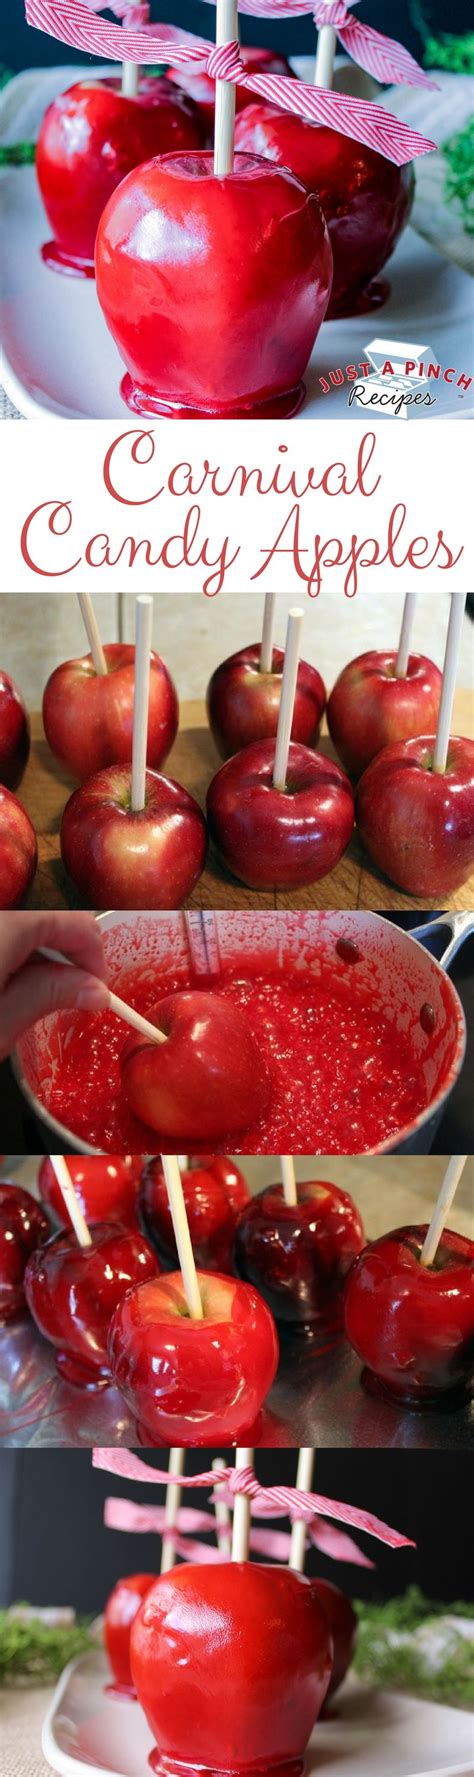 Carnival Candy Apples Recipe Candy Apple Recipe Apple Recipes